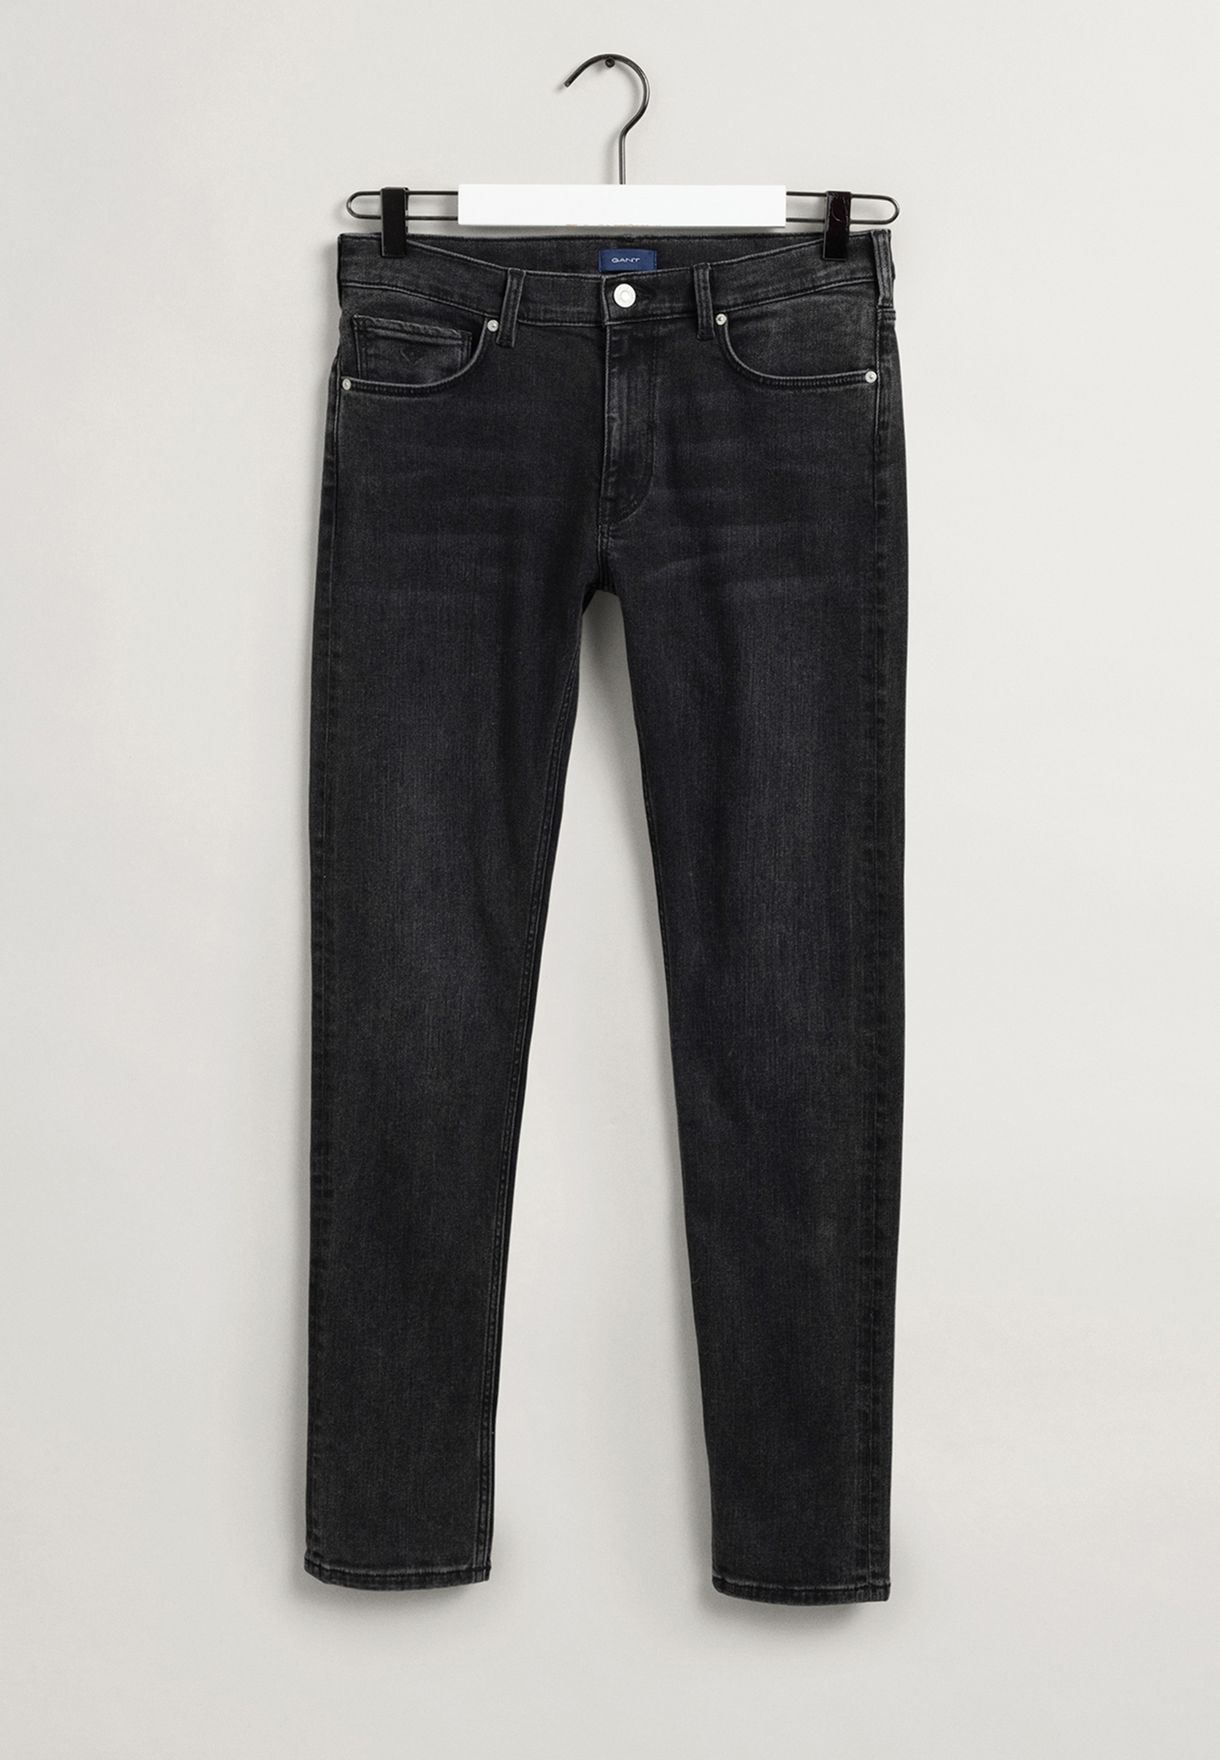 Youth Rinse Slim Fit Jeans